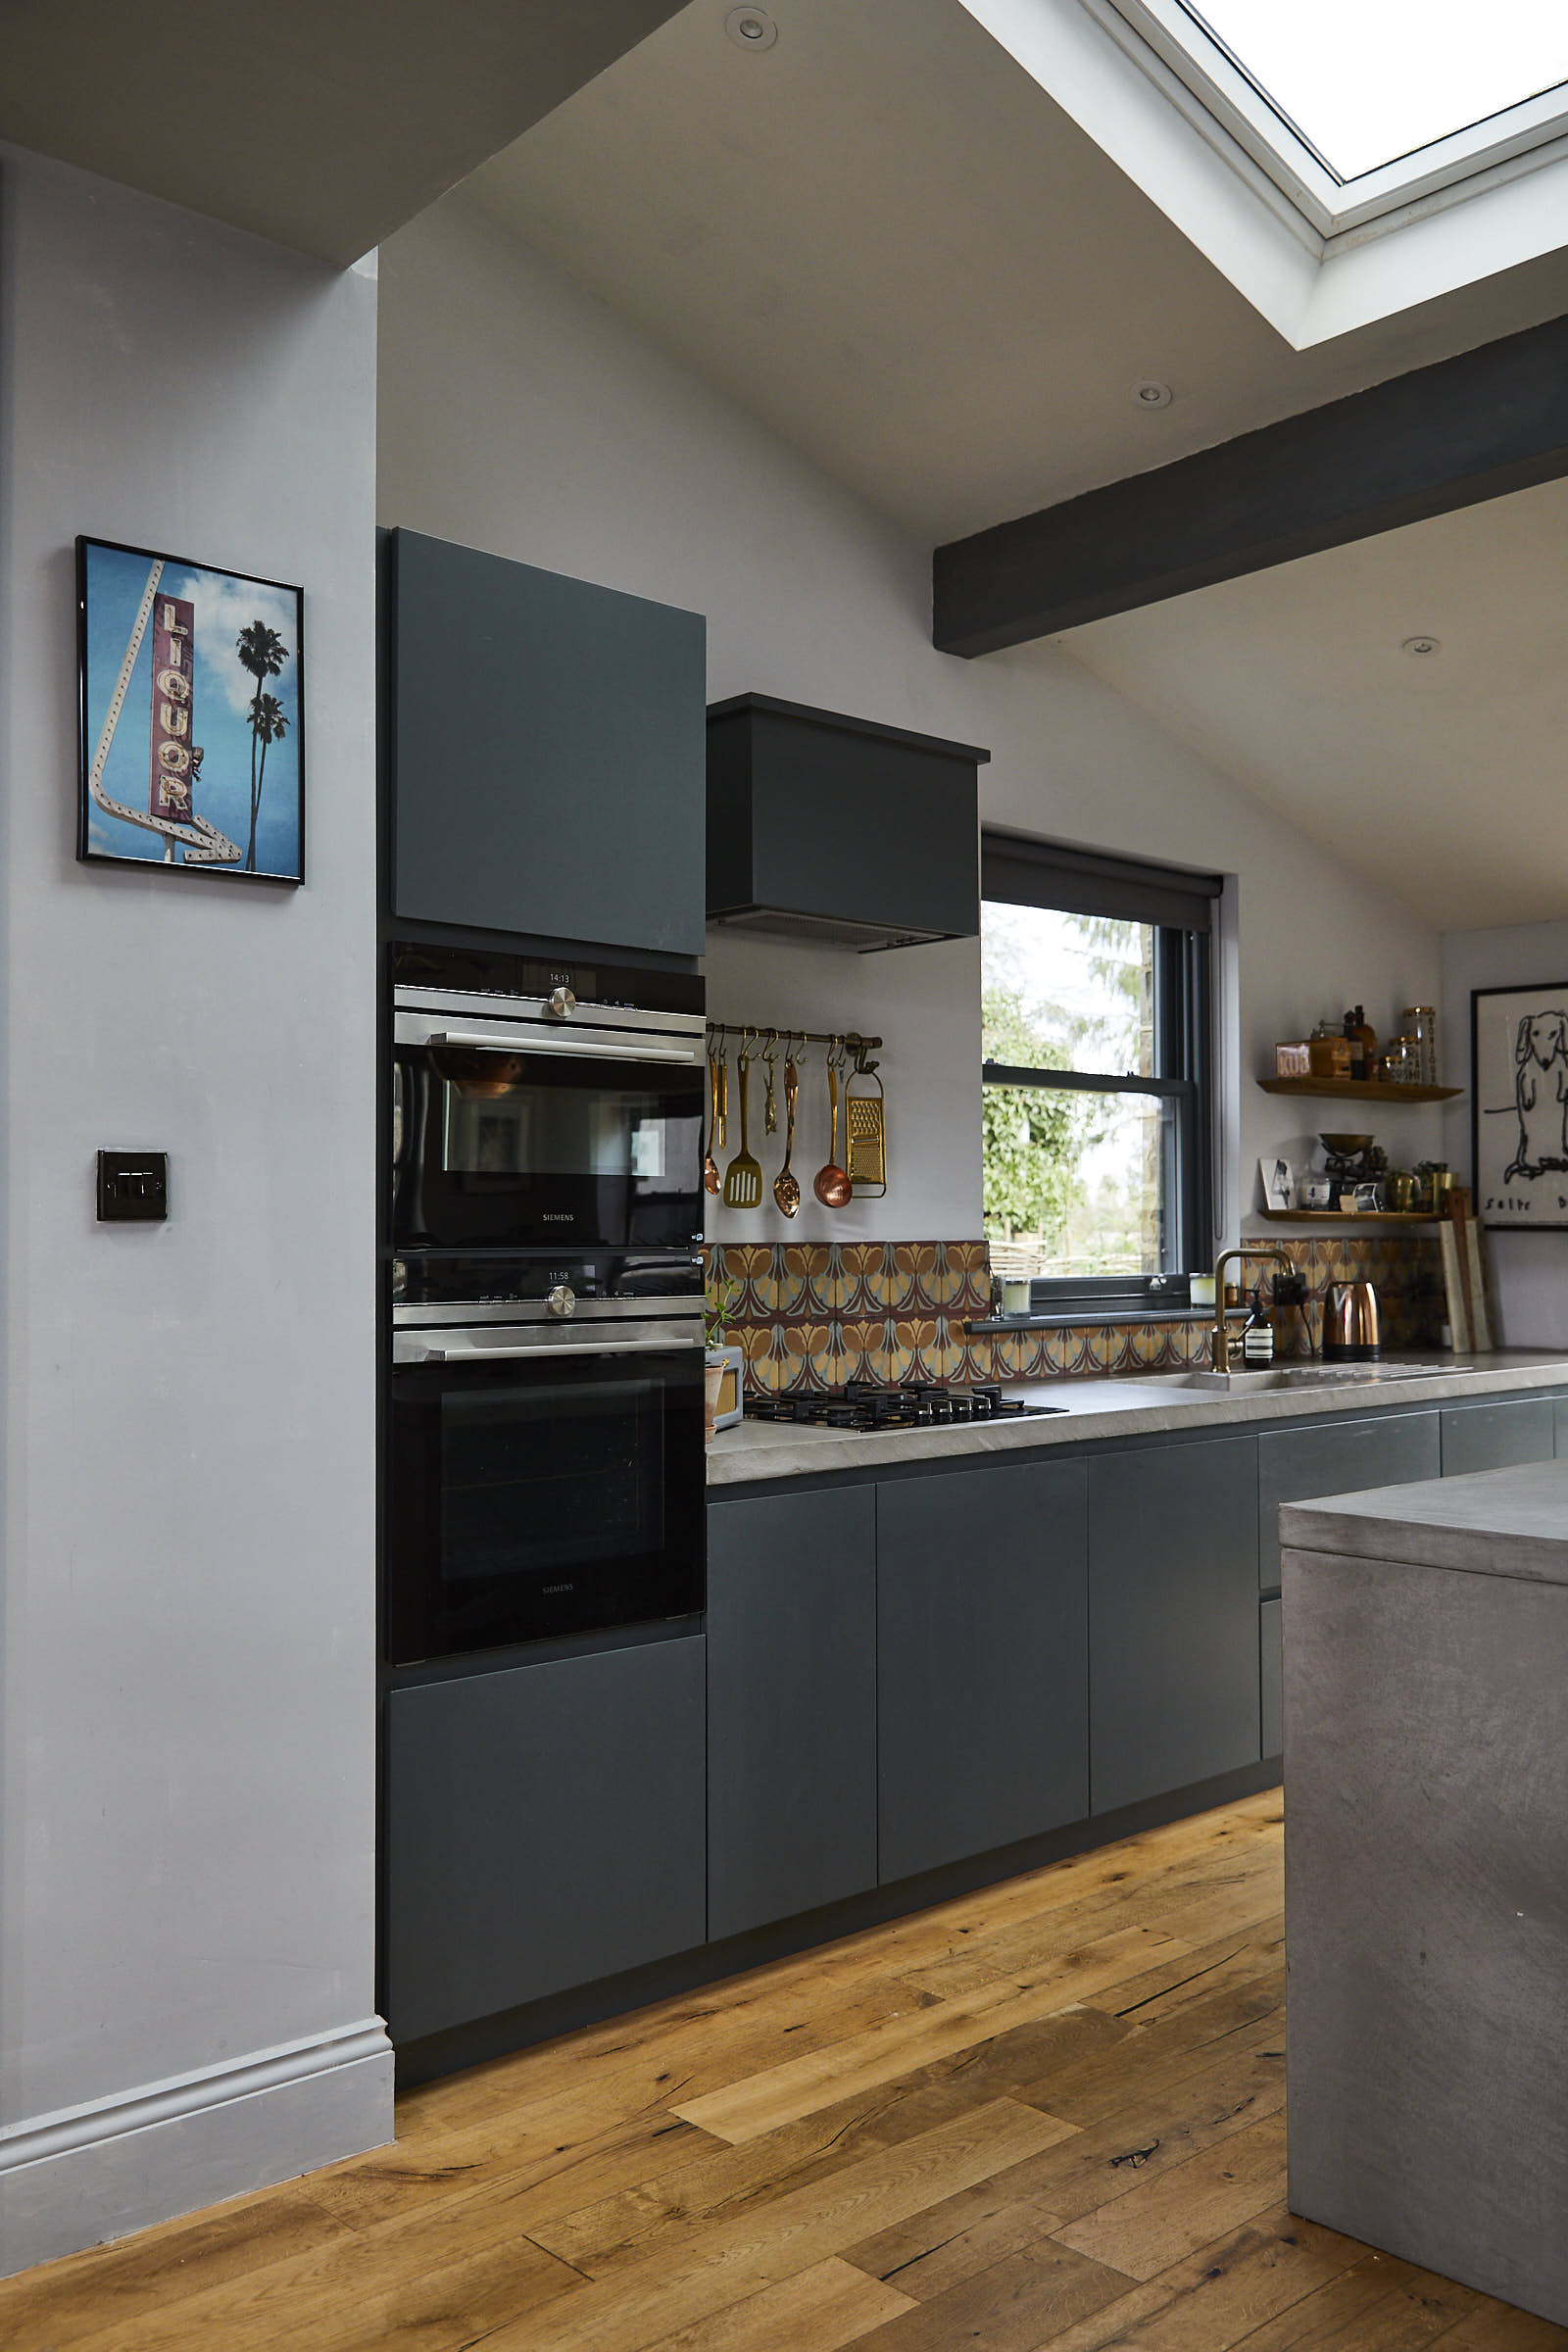 Integrated Siemens eye level ovens in slab painted tall kitchen units